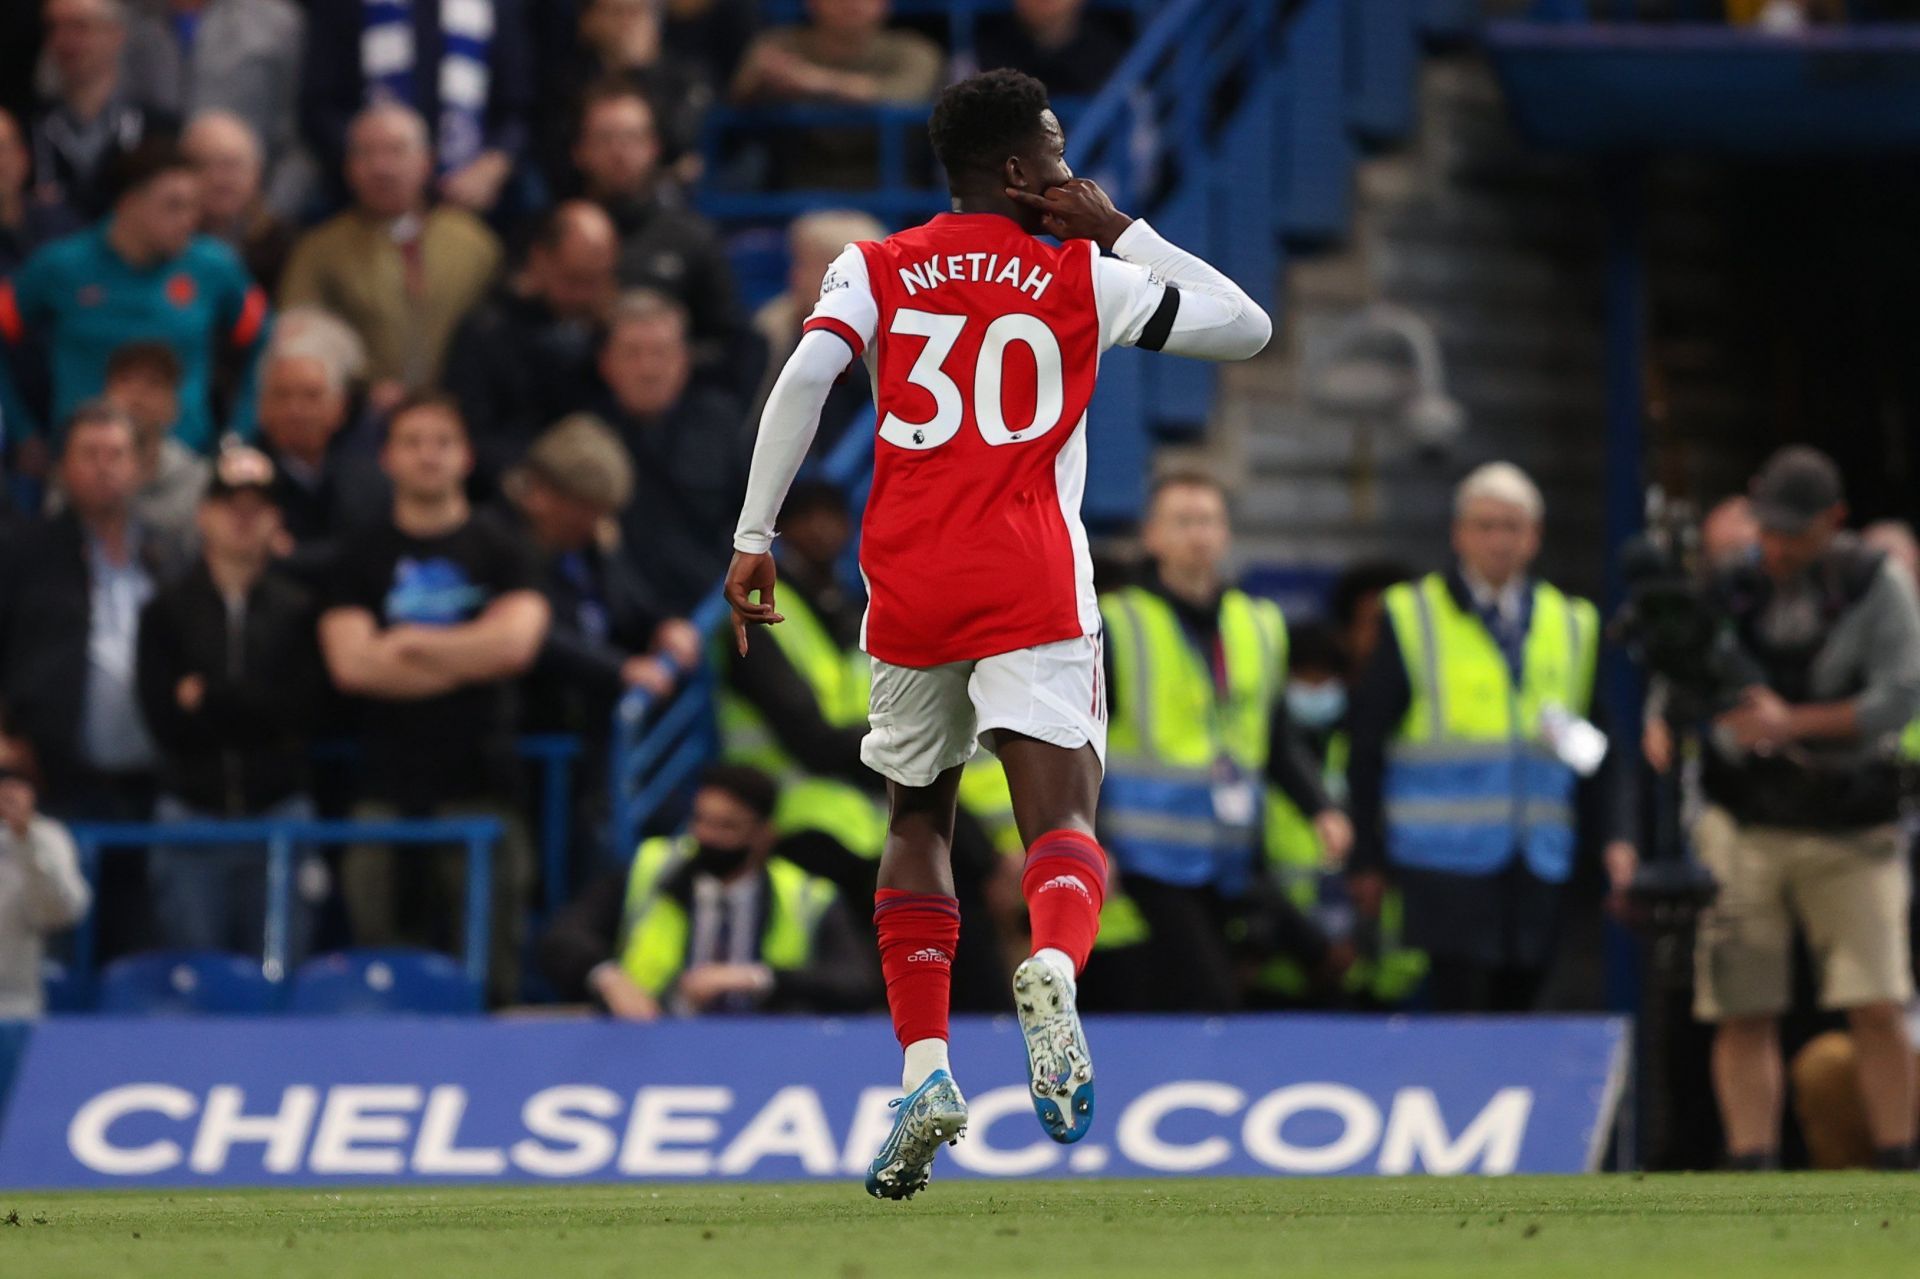 Eddie Nketiah was at the double as Arsenal defeated Chelsea in the Premier League